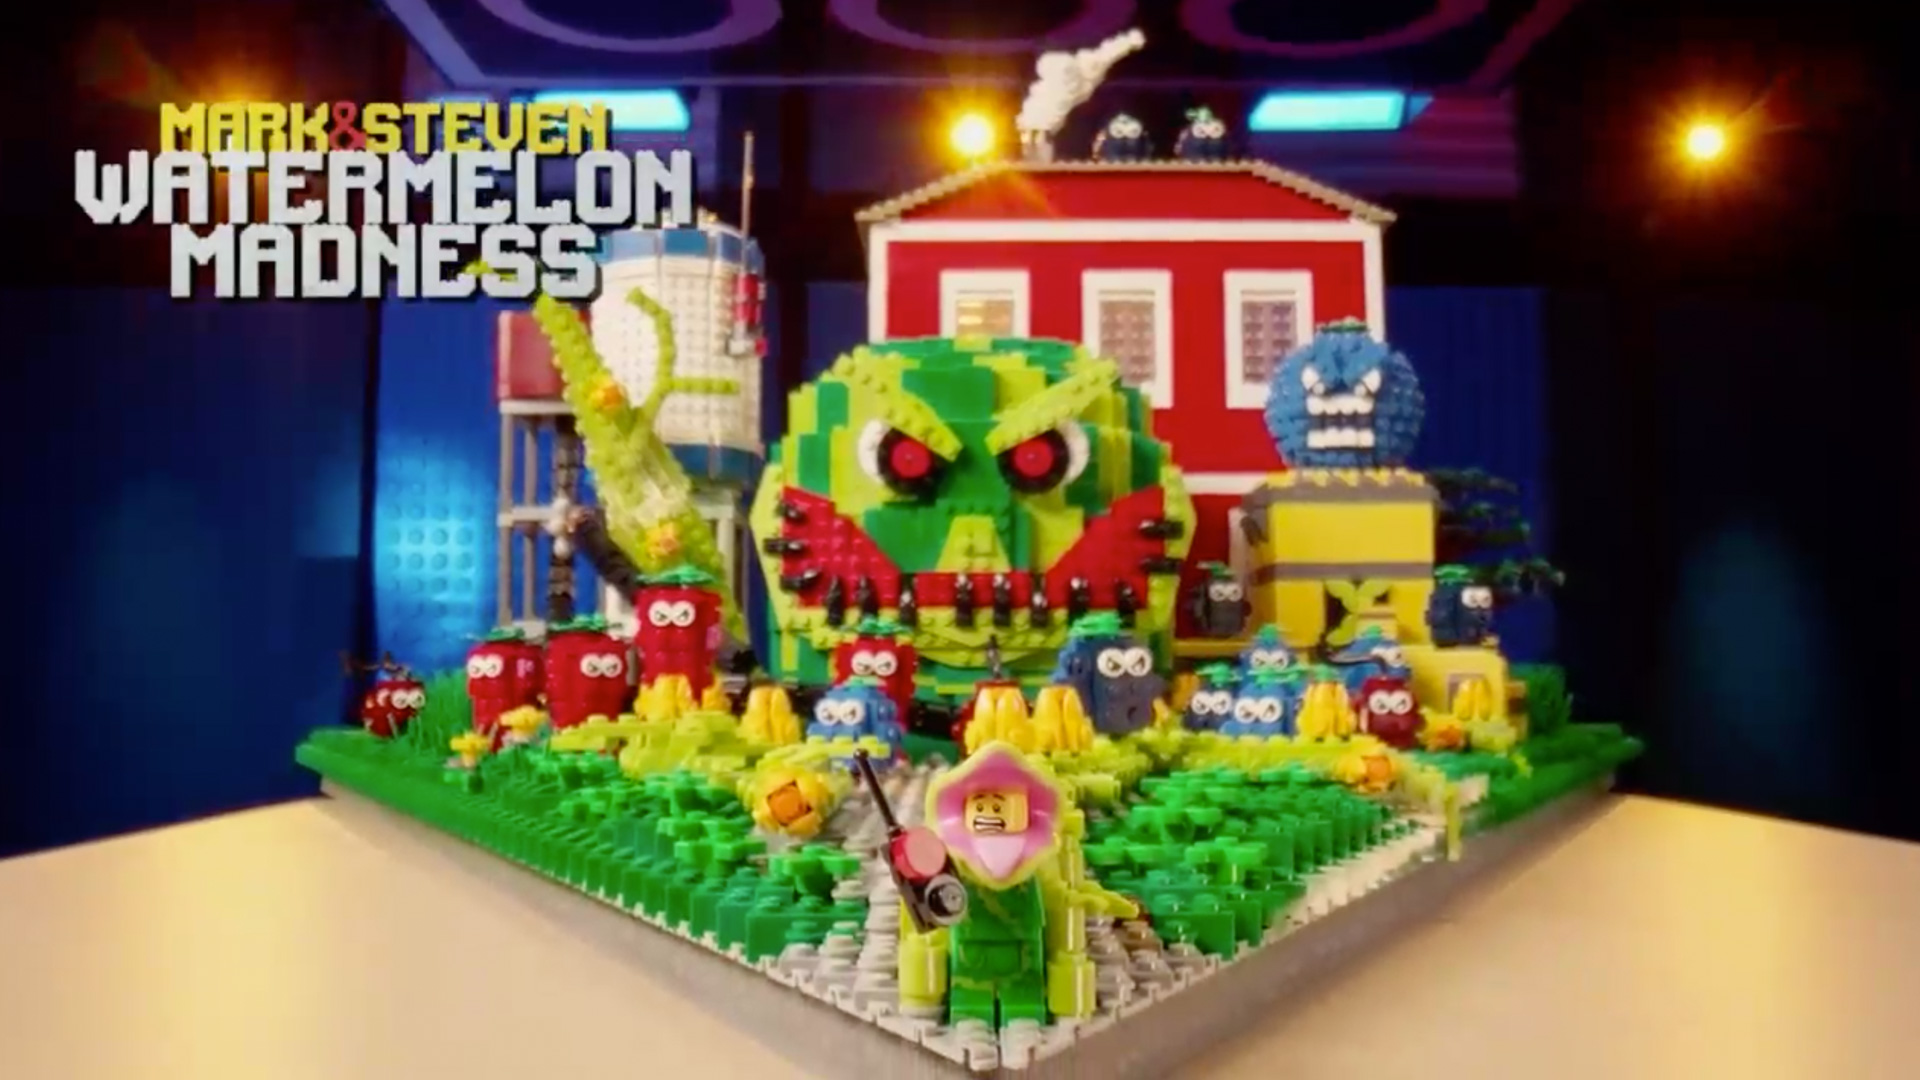 LEGO Masters U.S Season 2 – Explosion Challenge – Mark and Steven - Plant Monster - Water - Watermelon Madness